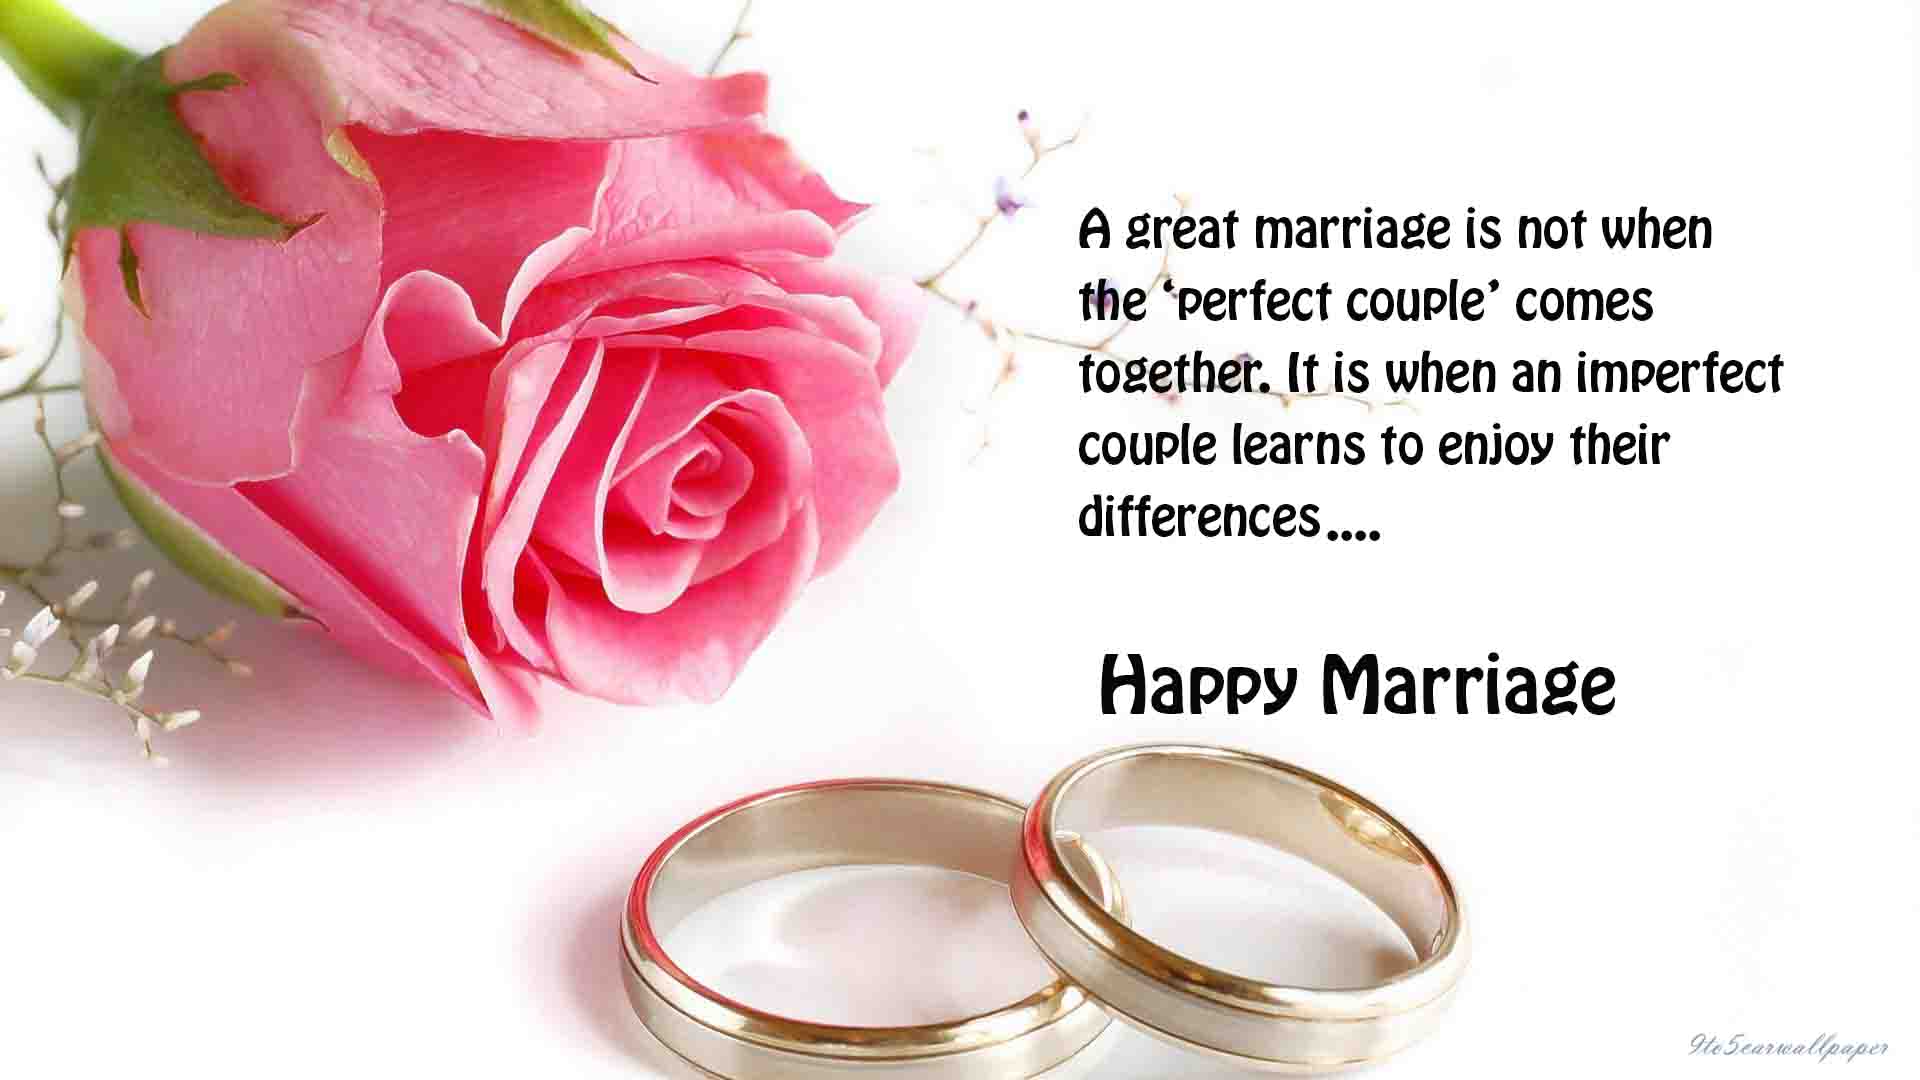 Happy Marriage Quotes & Sayings 2017 Images - My Site